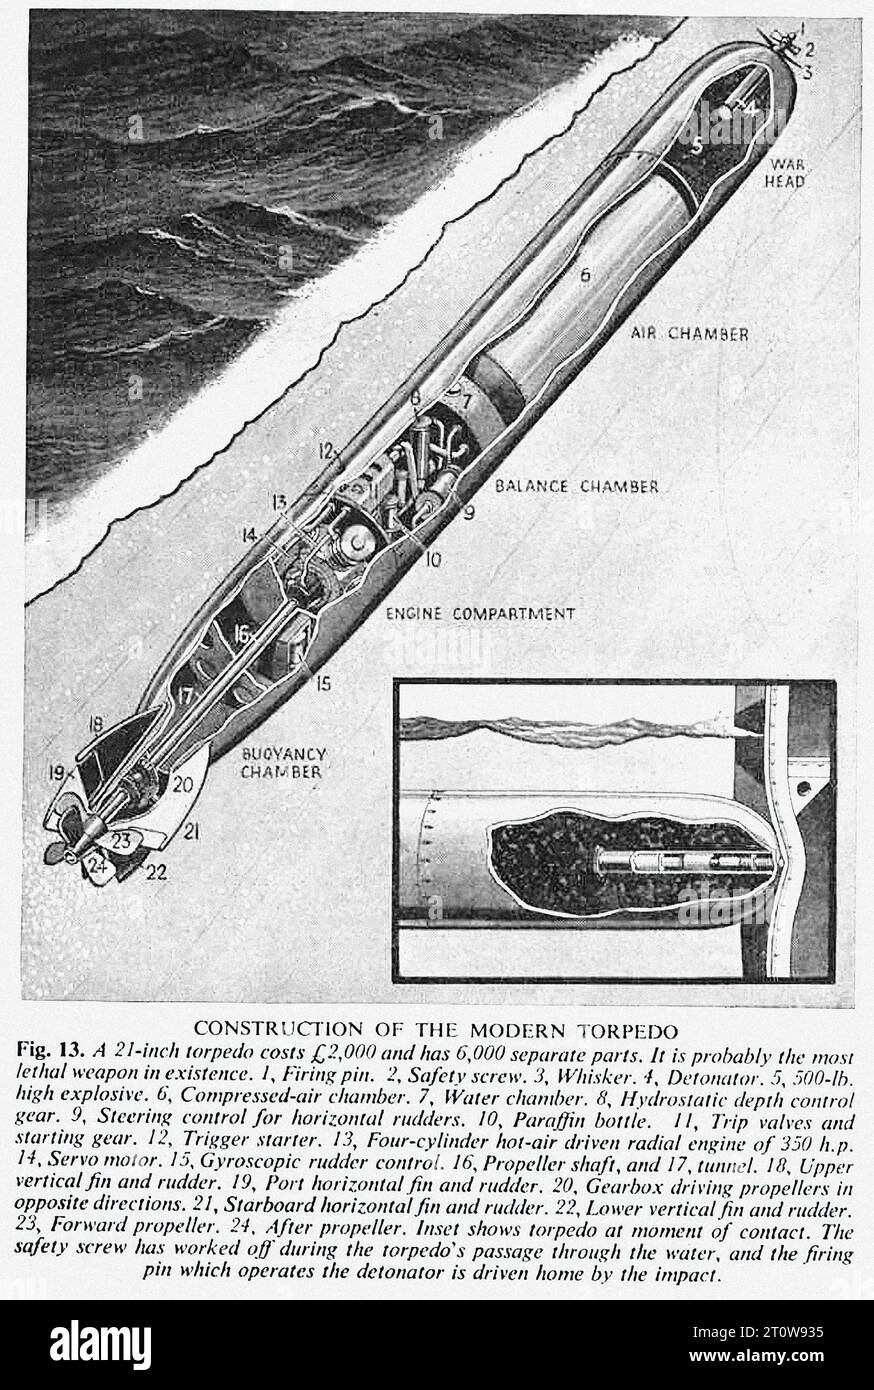 Illustrated Armament Description, British Newspaper - United Kingdom, Second World War : The image is a black and white diagram of a torpedo. The torpedo is shown in a cross-section view with labels and numbers pointing to different parts. The top of the image has a label that reads “CONSTRUCTION OF THE MODERN TORPEDO”. The torpedo has a pointed nose and a cylindrical body. The body of the torpedo is divided into different sections, including a balance chamber, engine compartment, and buoyancy chamber. The torpedo is propelled by a propeller at the rear. The image also includes a smaller diagr Stock Photo